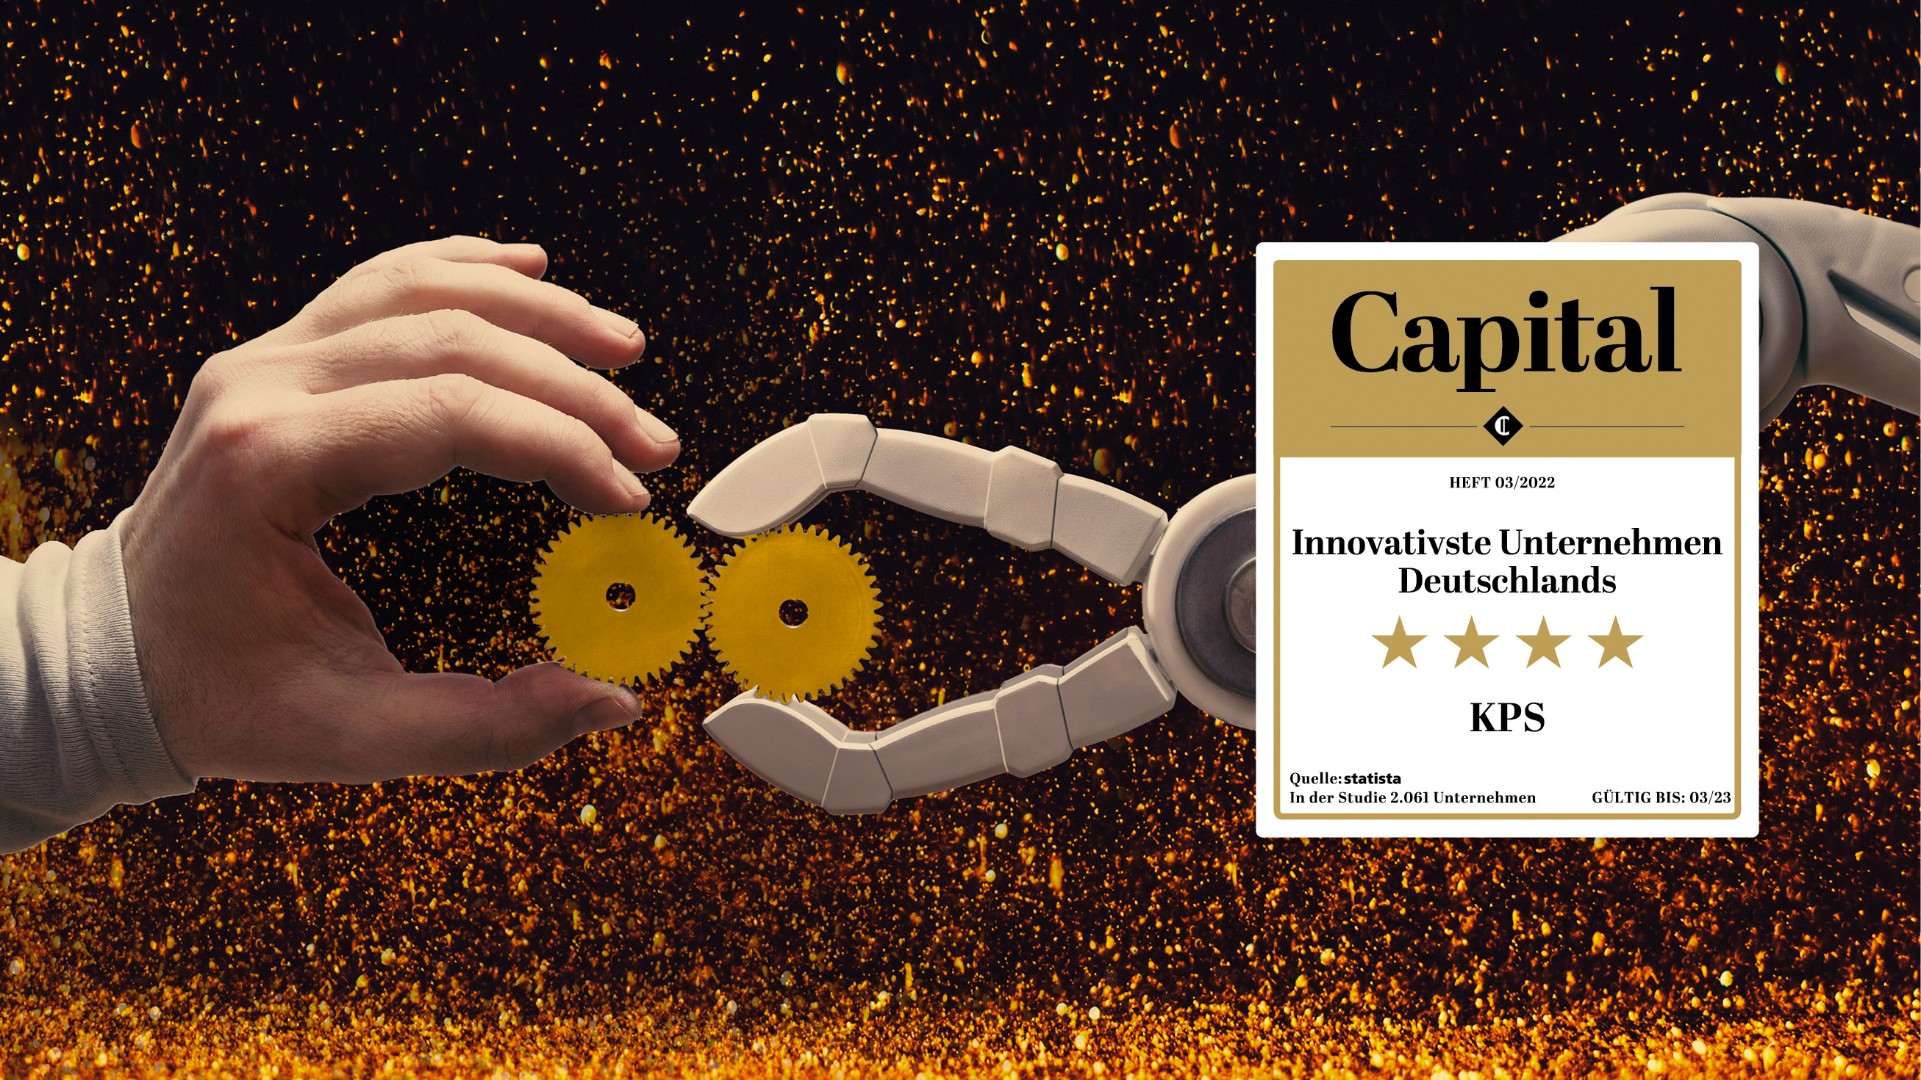 Capital and Statista award "Most Innovative Companies 2022"